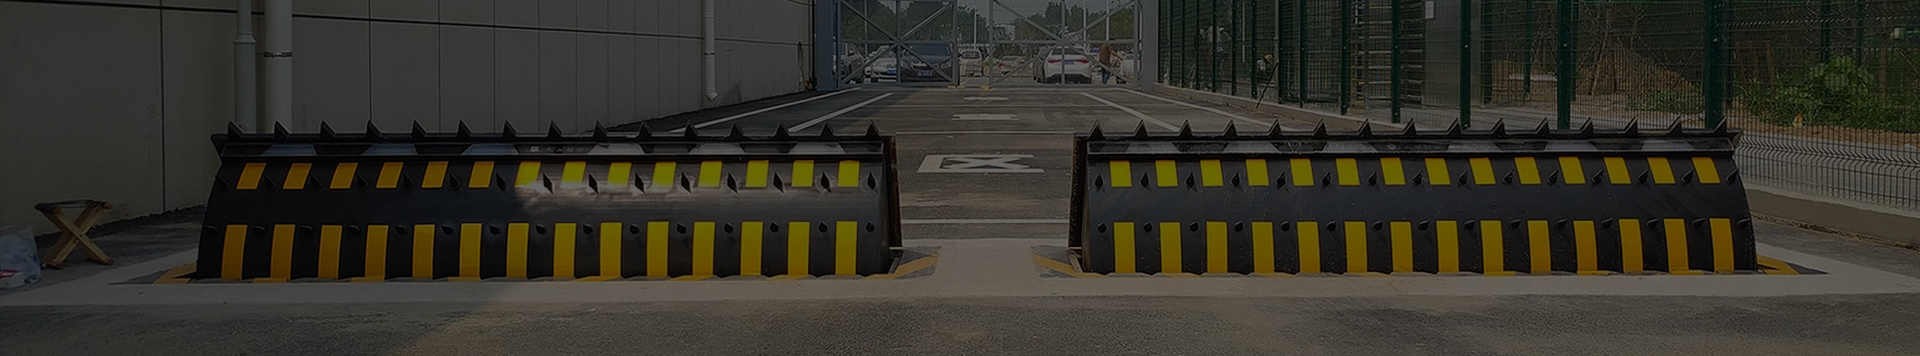 Inducere characteres in securitatem products roadblocker strigare